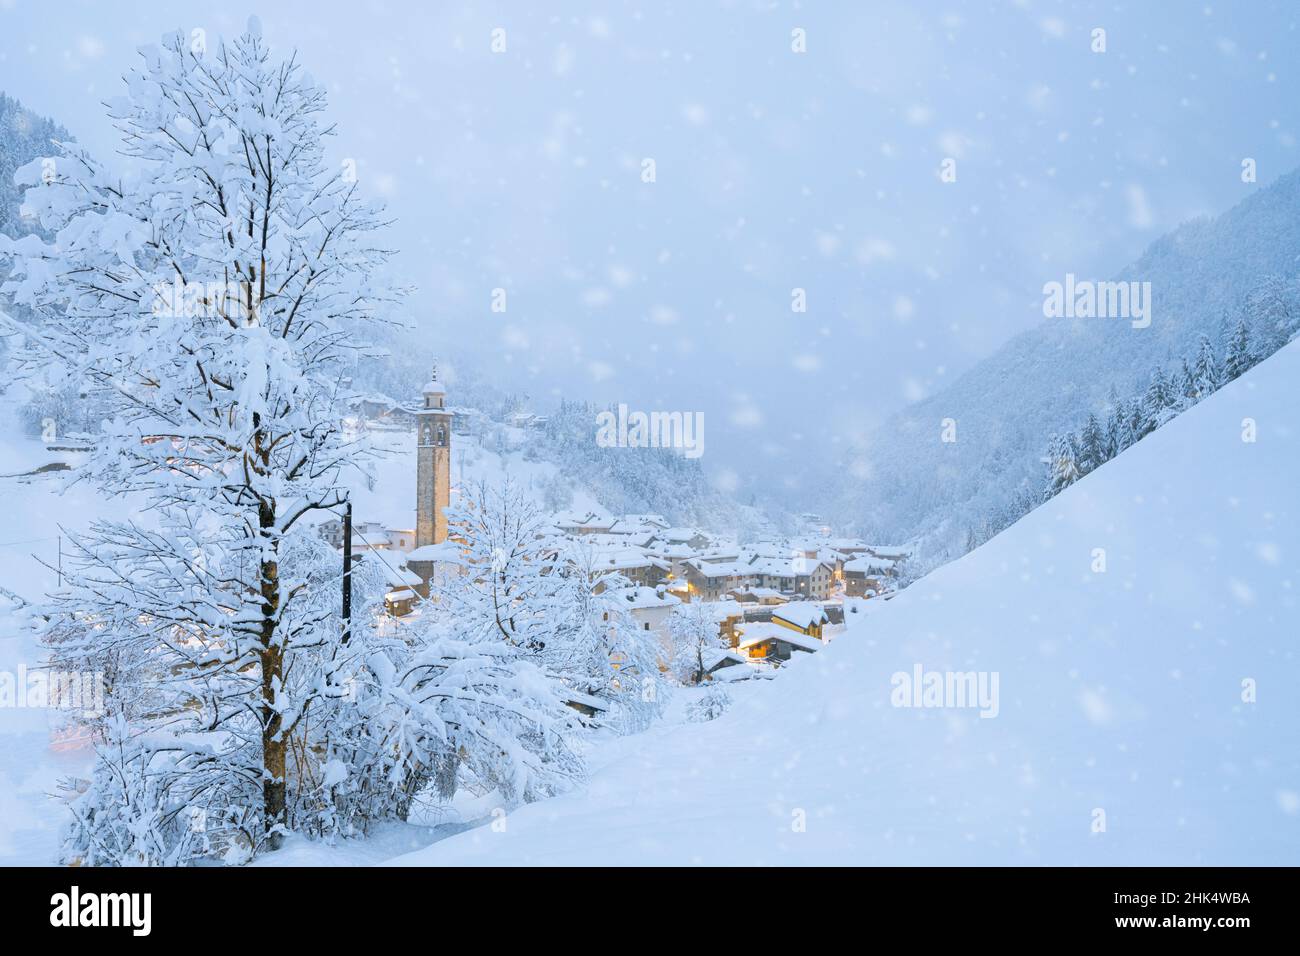 Snowflakes falling on mountain huts in the fairy tale alpine village at Christmas time, Valgerola, Valtellina, Lombardy, Italy, Europe Stock Photo